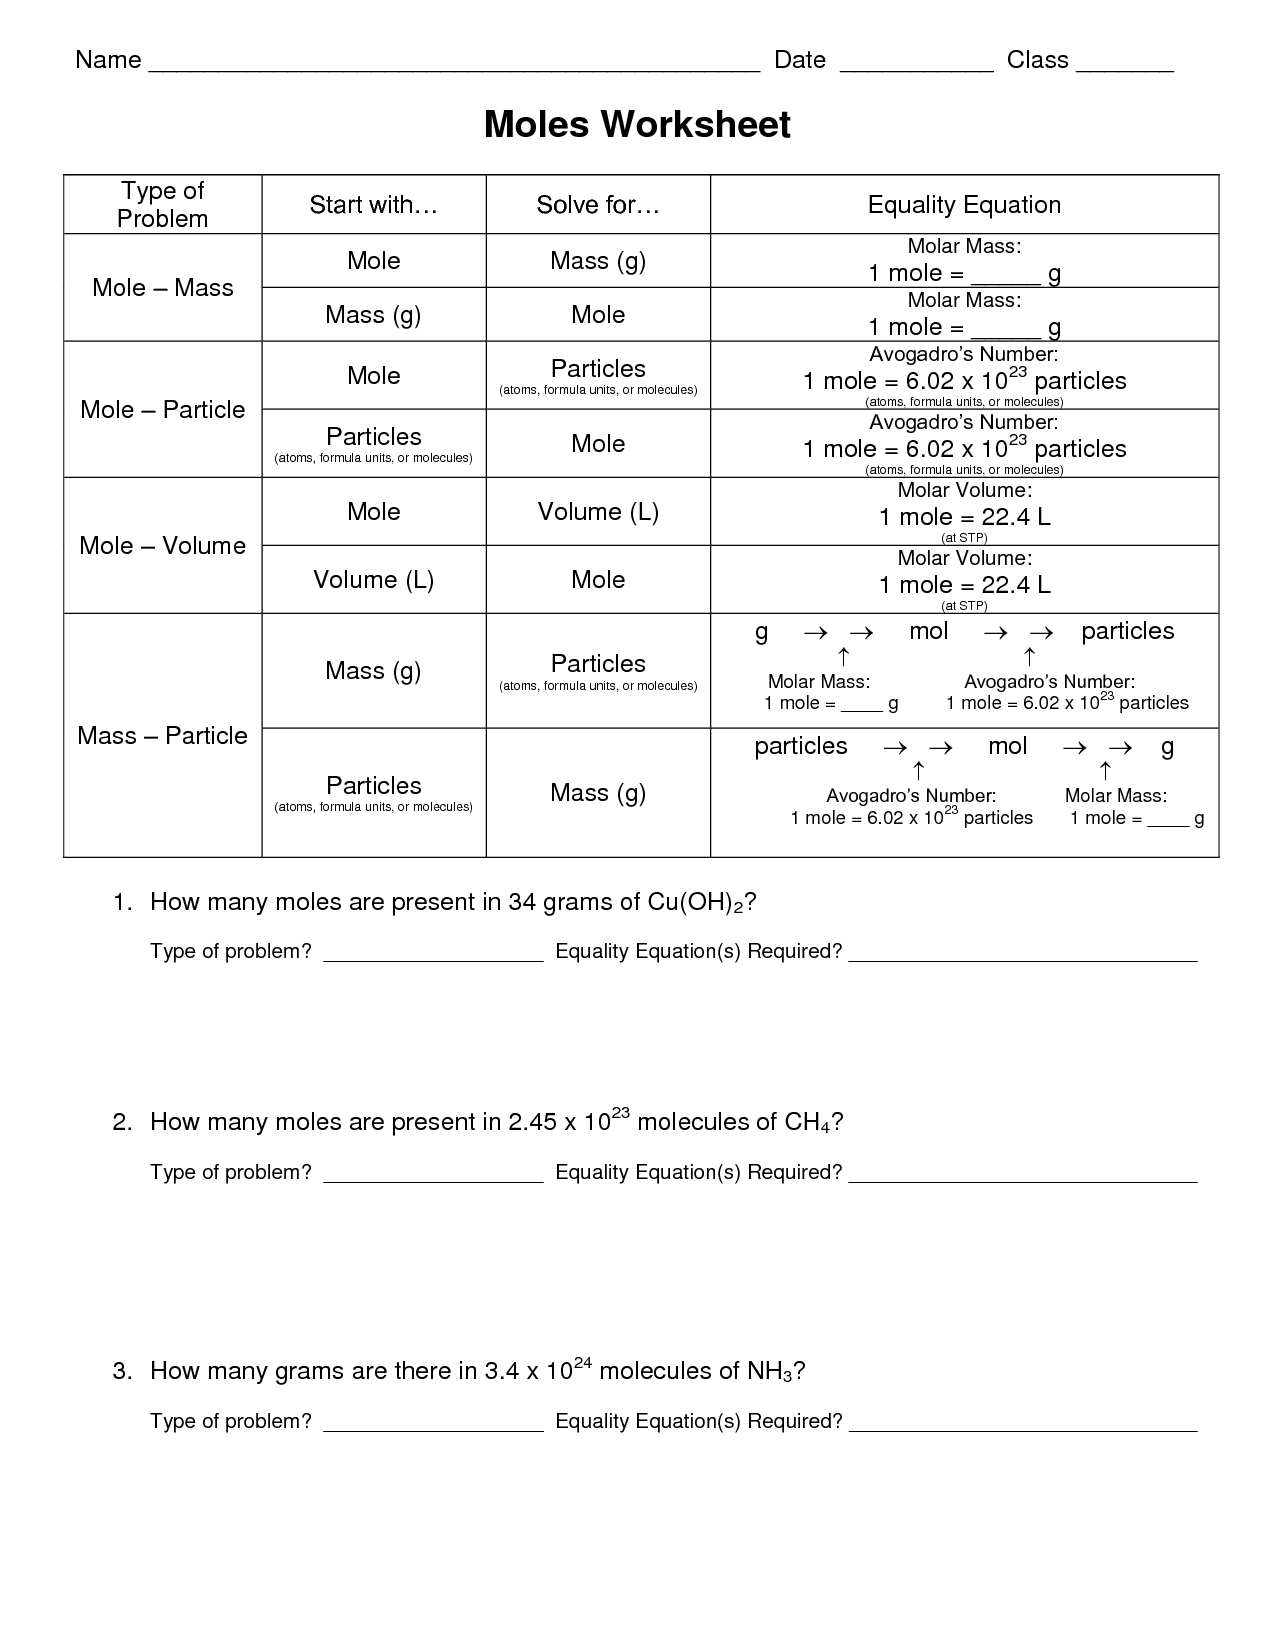 10 Best Images Of Moles And Mass Worksheet Answers Moles